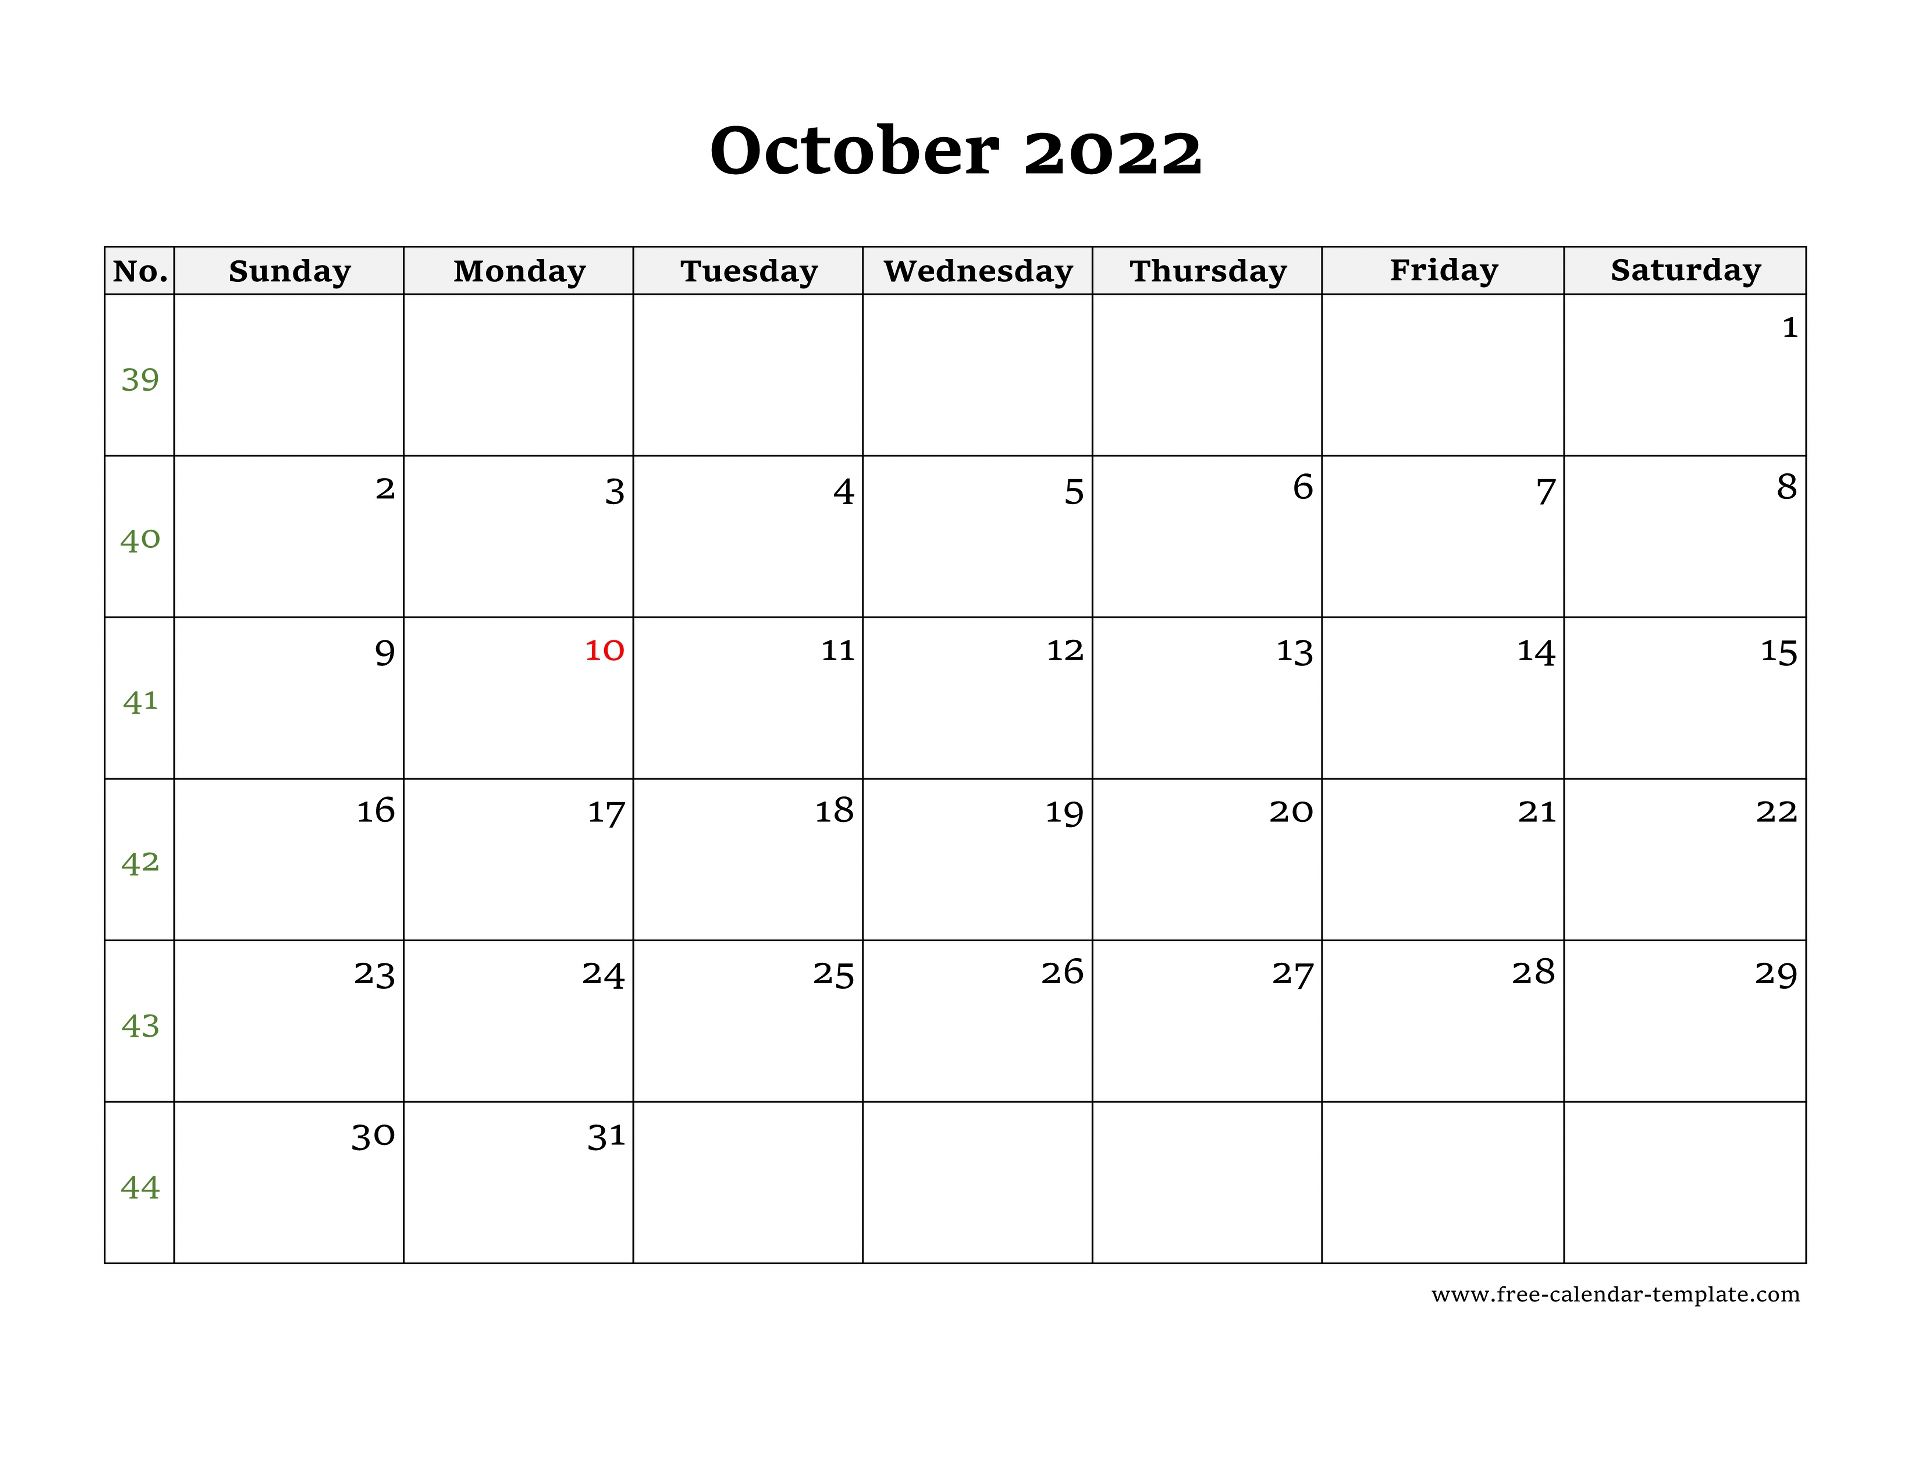 Simple October Calendar 2022 large box on each day for notes. Free